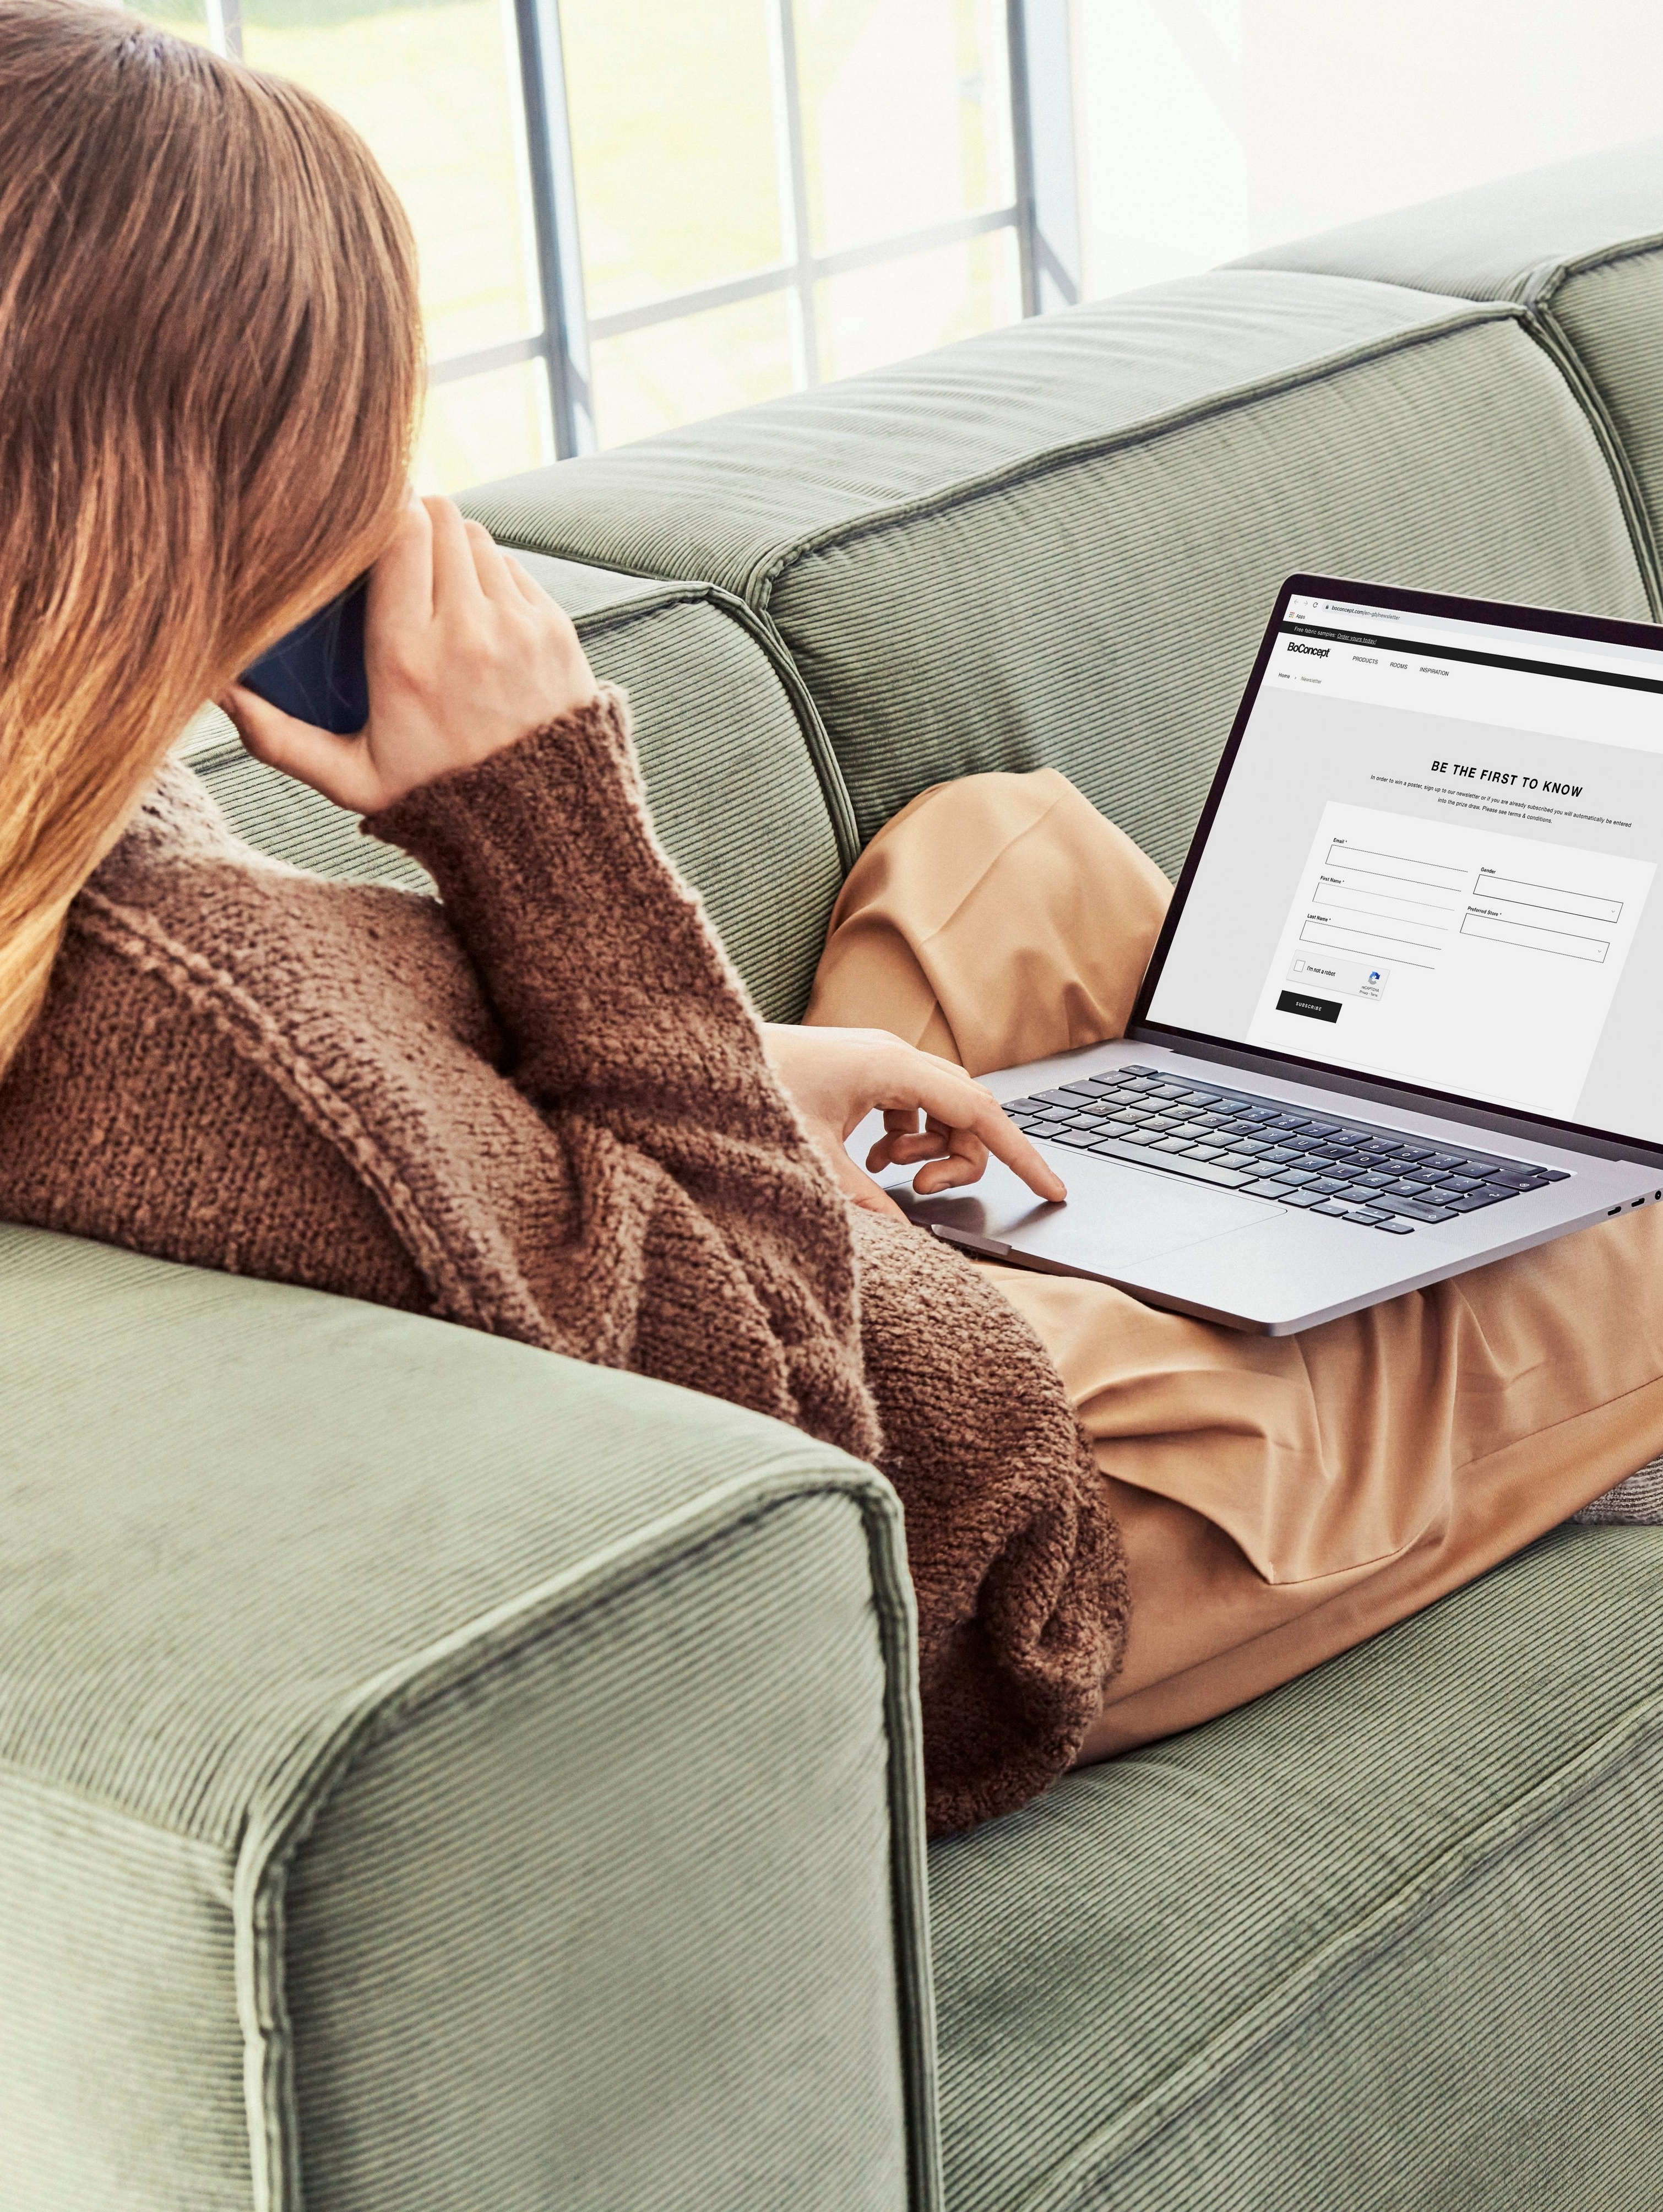 Woman on Carmo green sofa using laptop, with brown clothes and wooden side table.